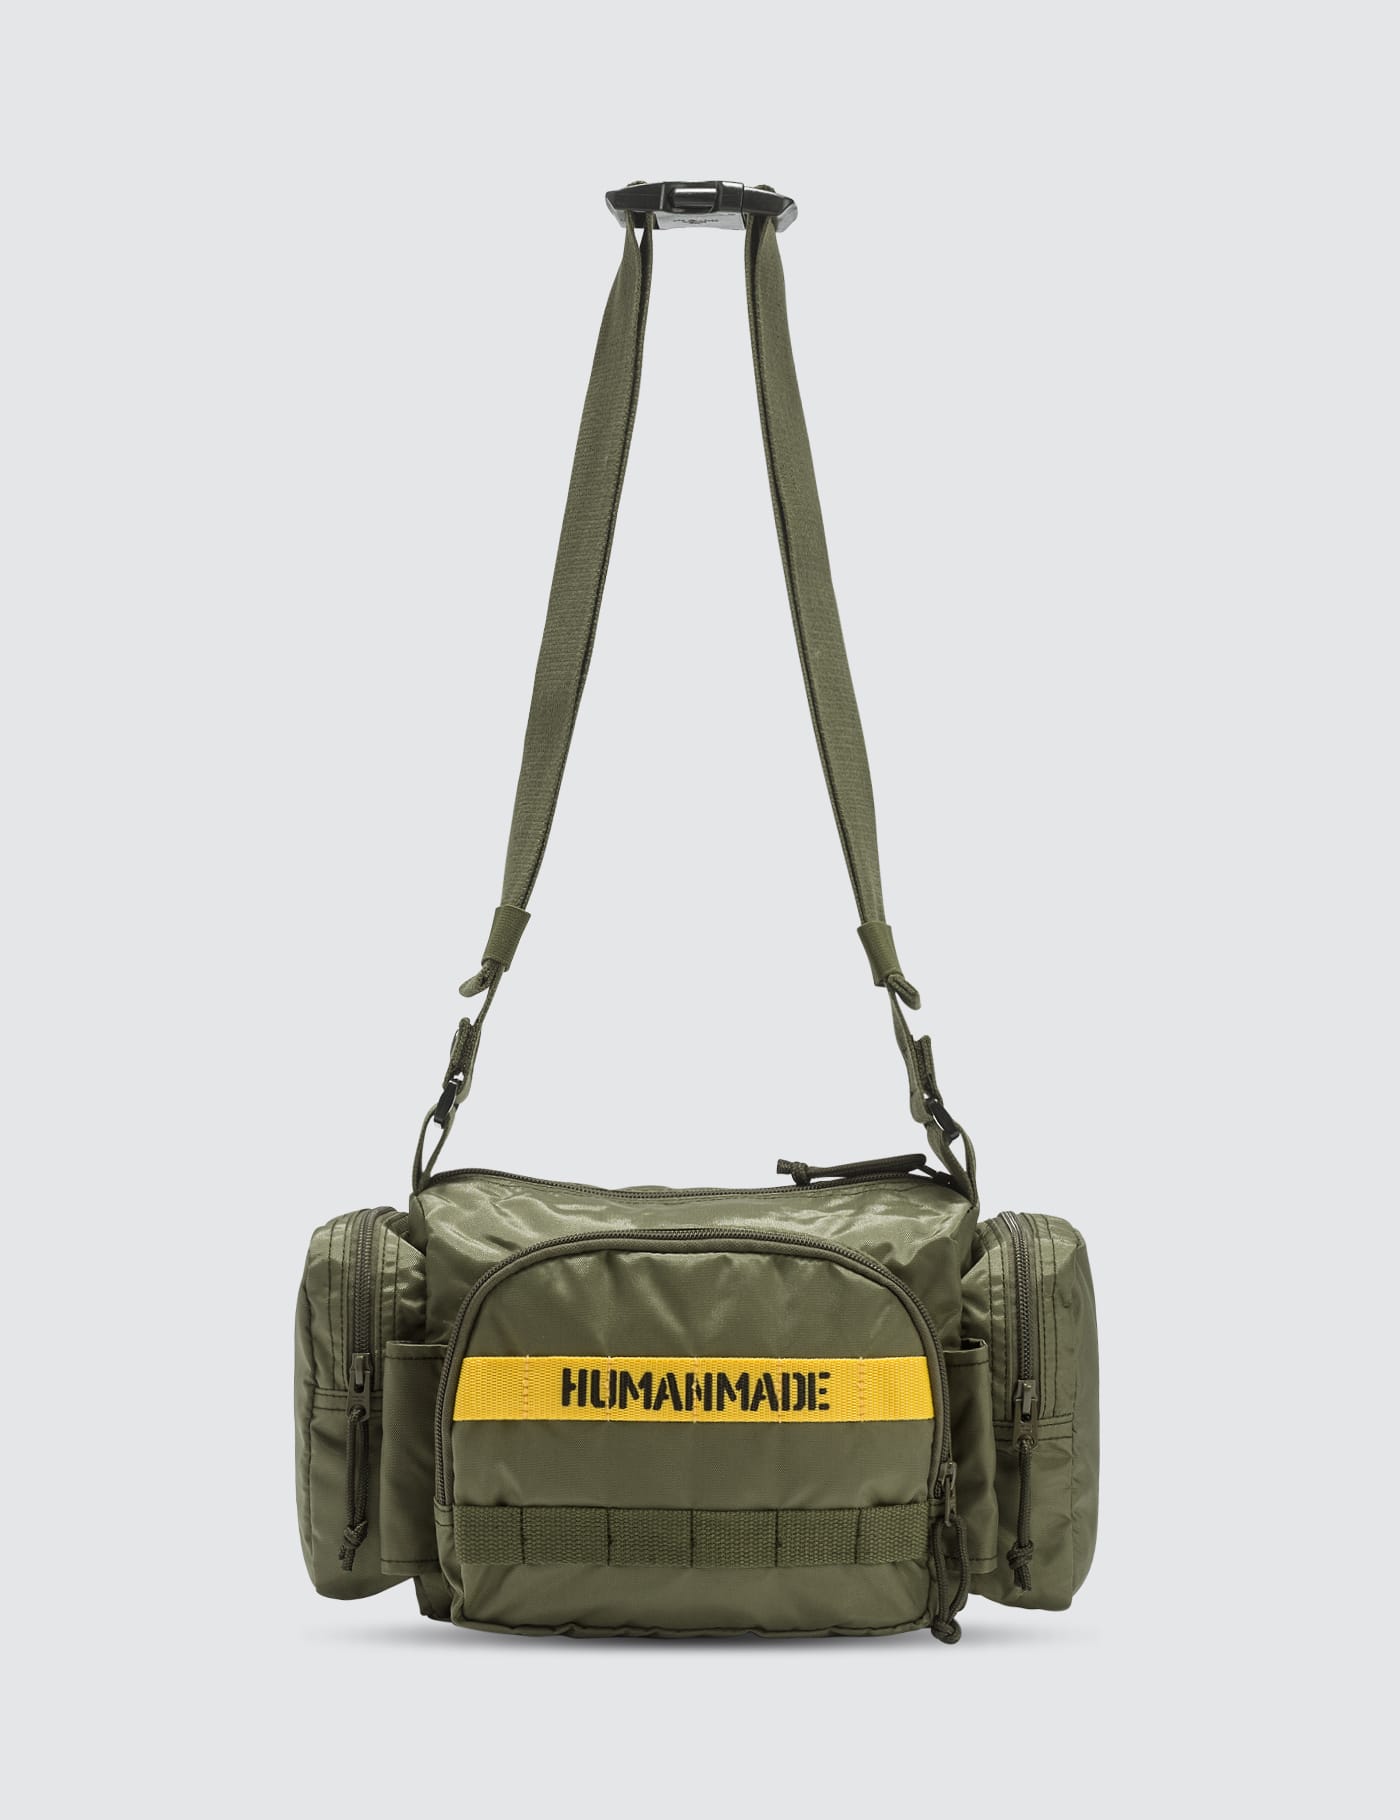 Human Made - Two-way Military Waist Bag | HBX - Globally Curated